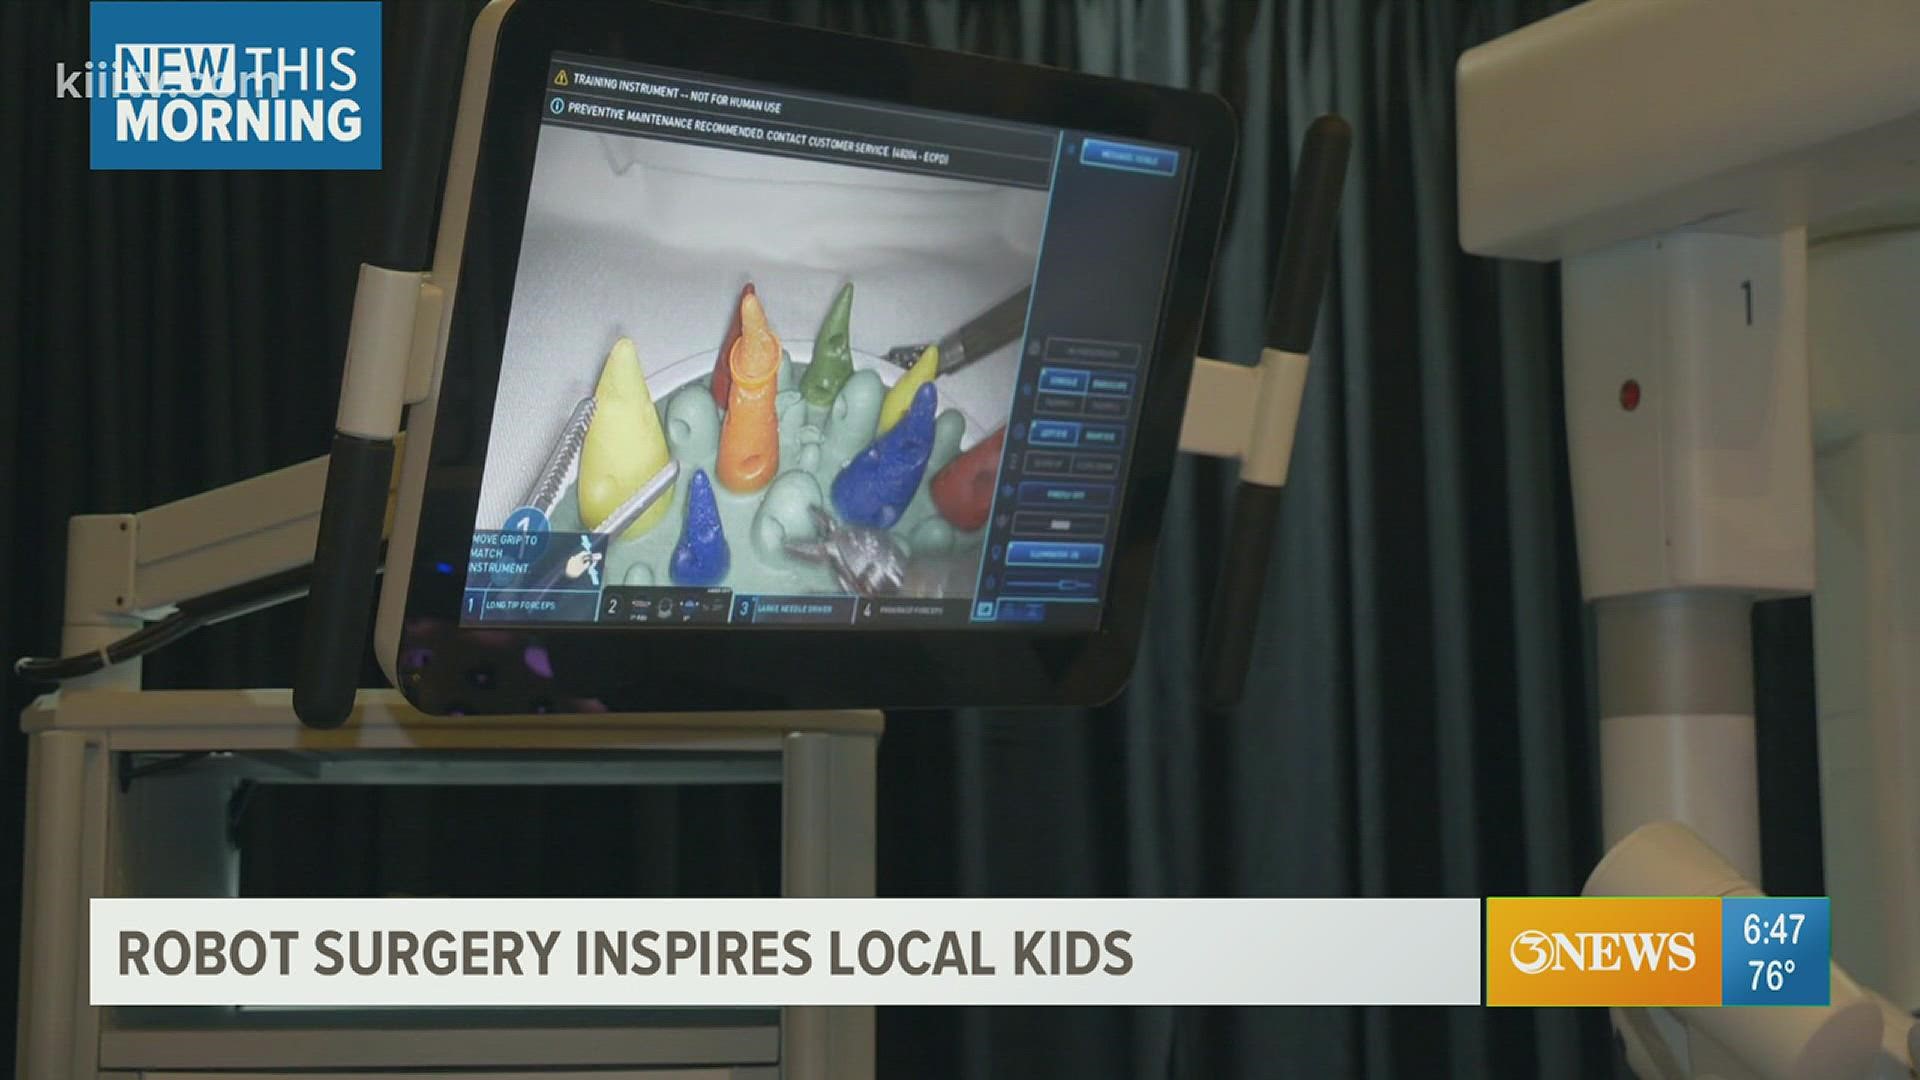 Kids interacted with a robot system that helps perform minor invasive surgeries.